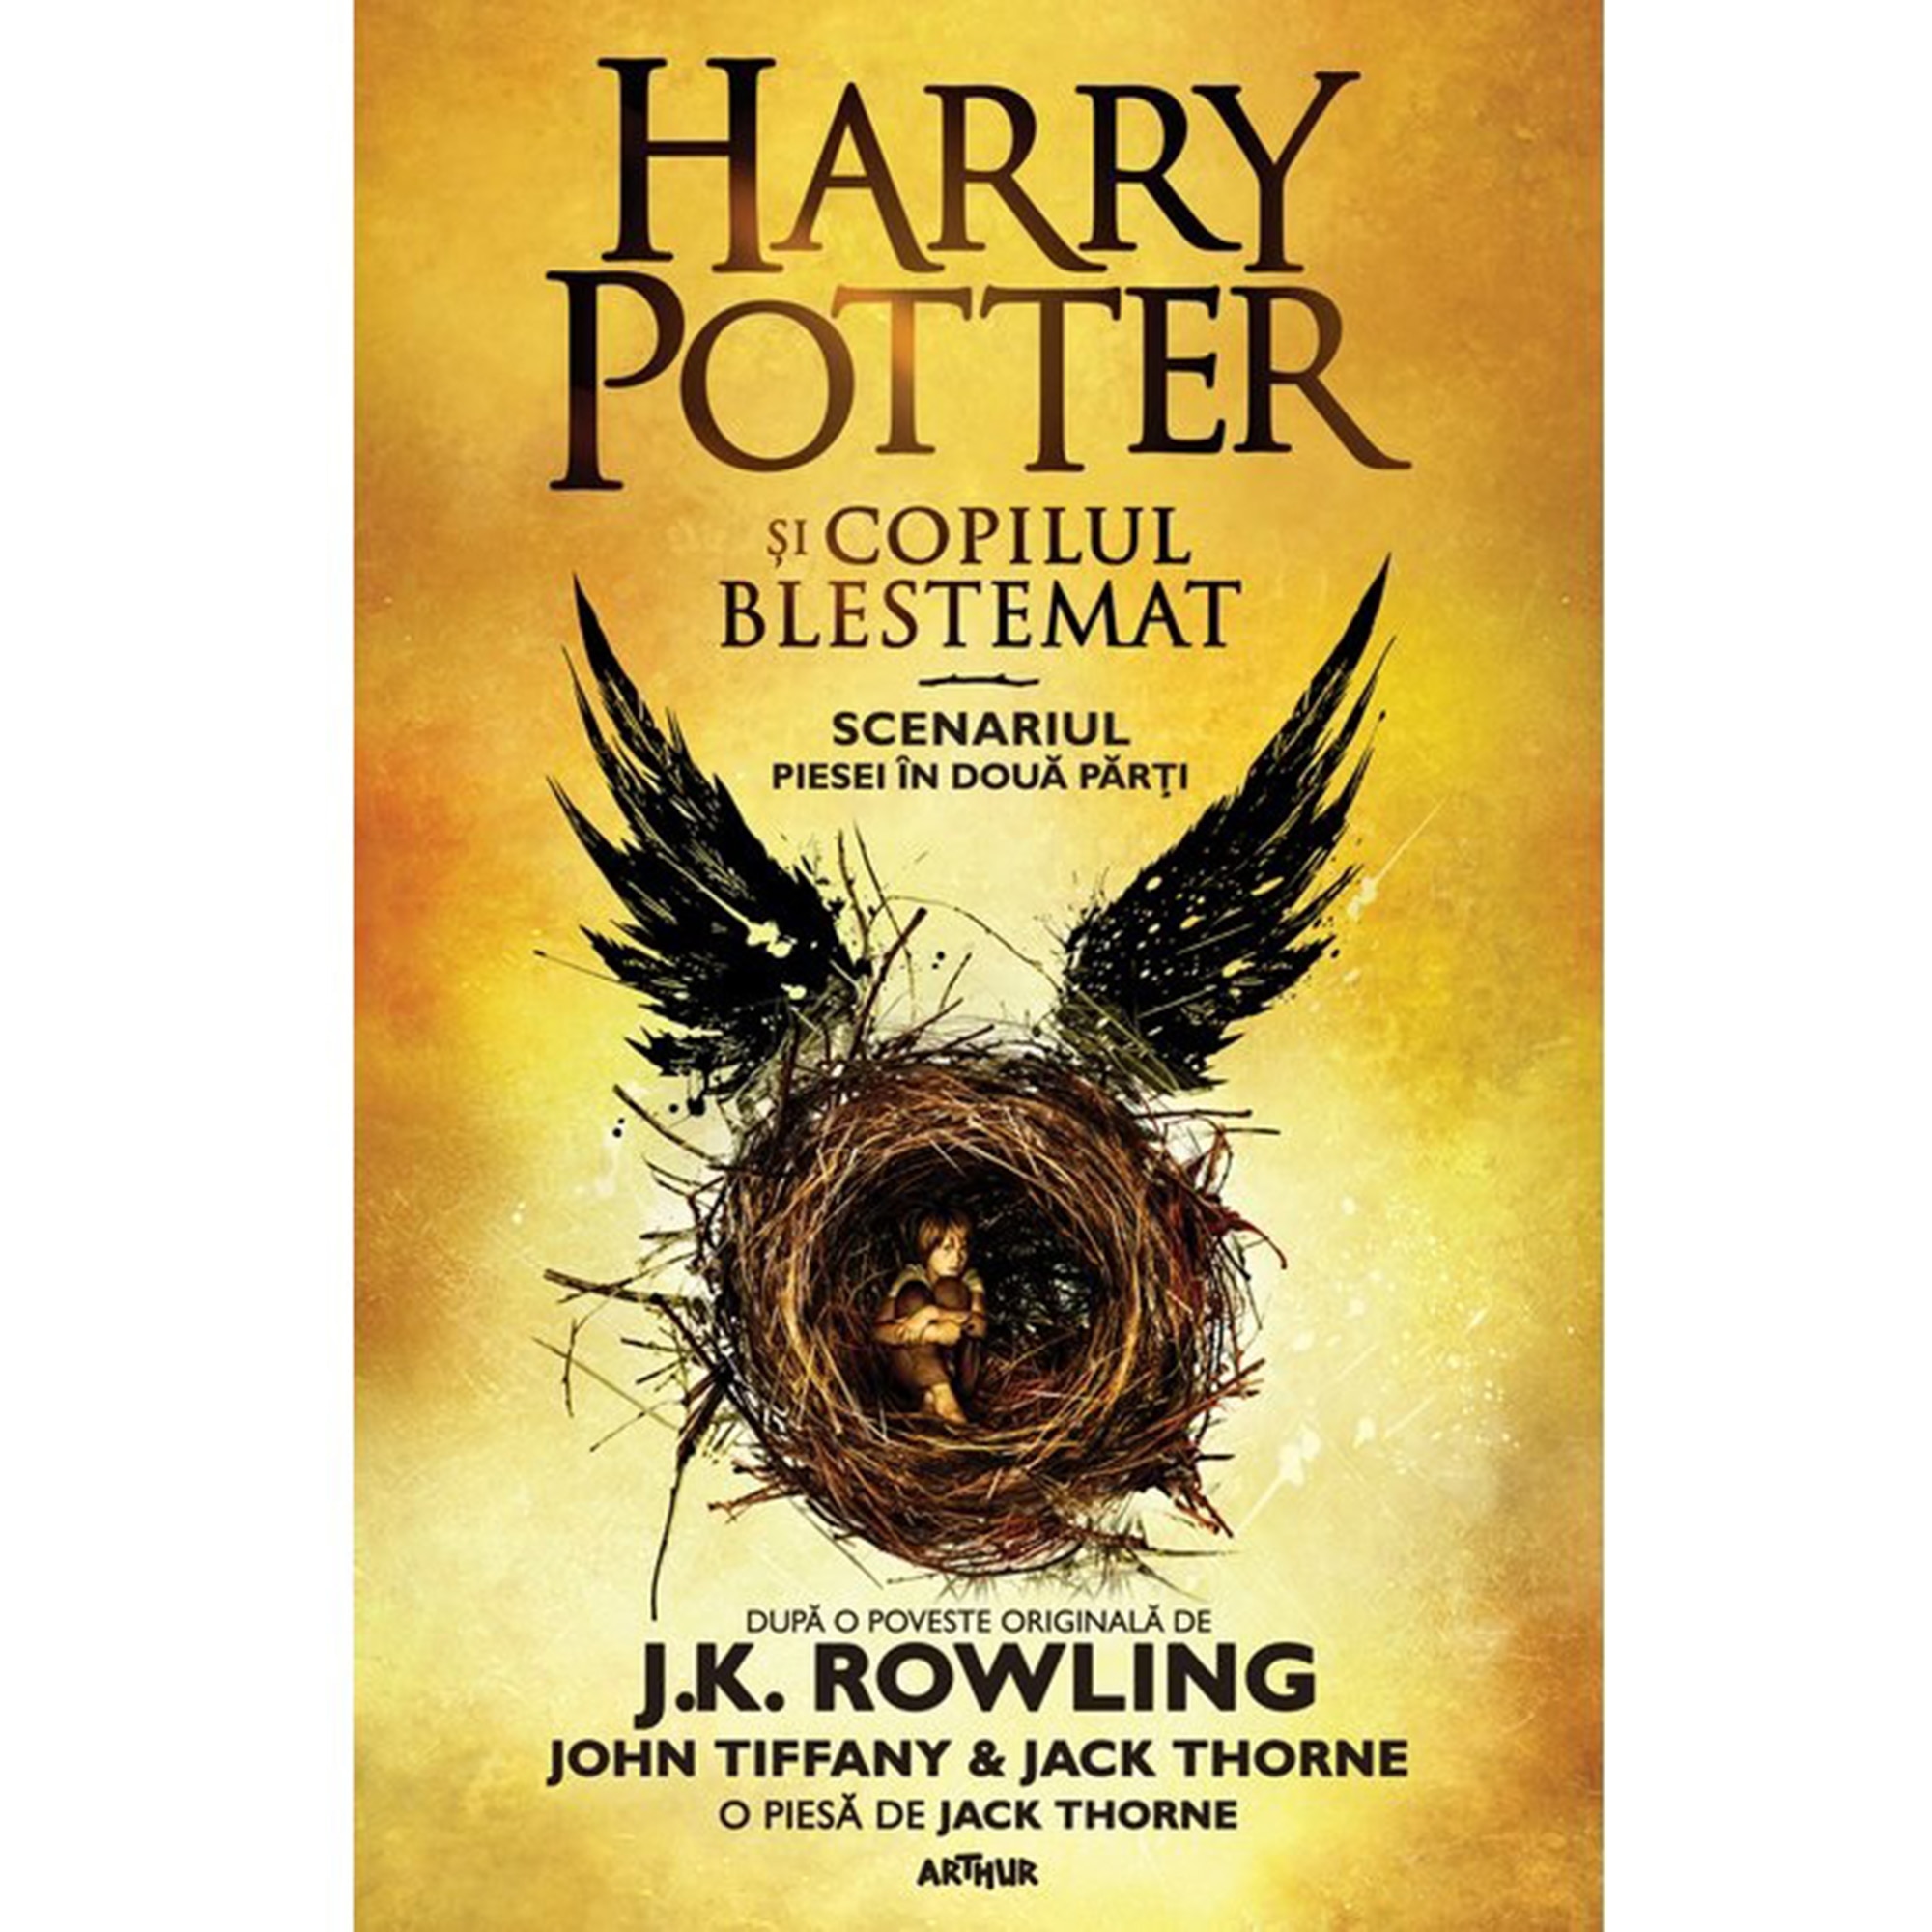 Potter 8 …si copilul blestemat, Rowling -